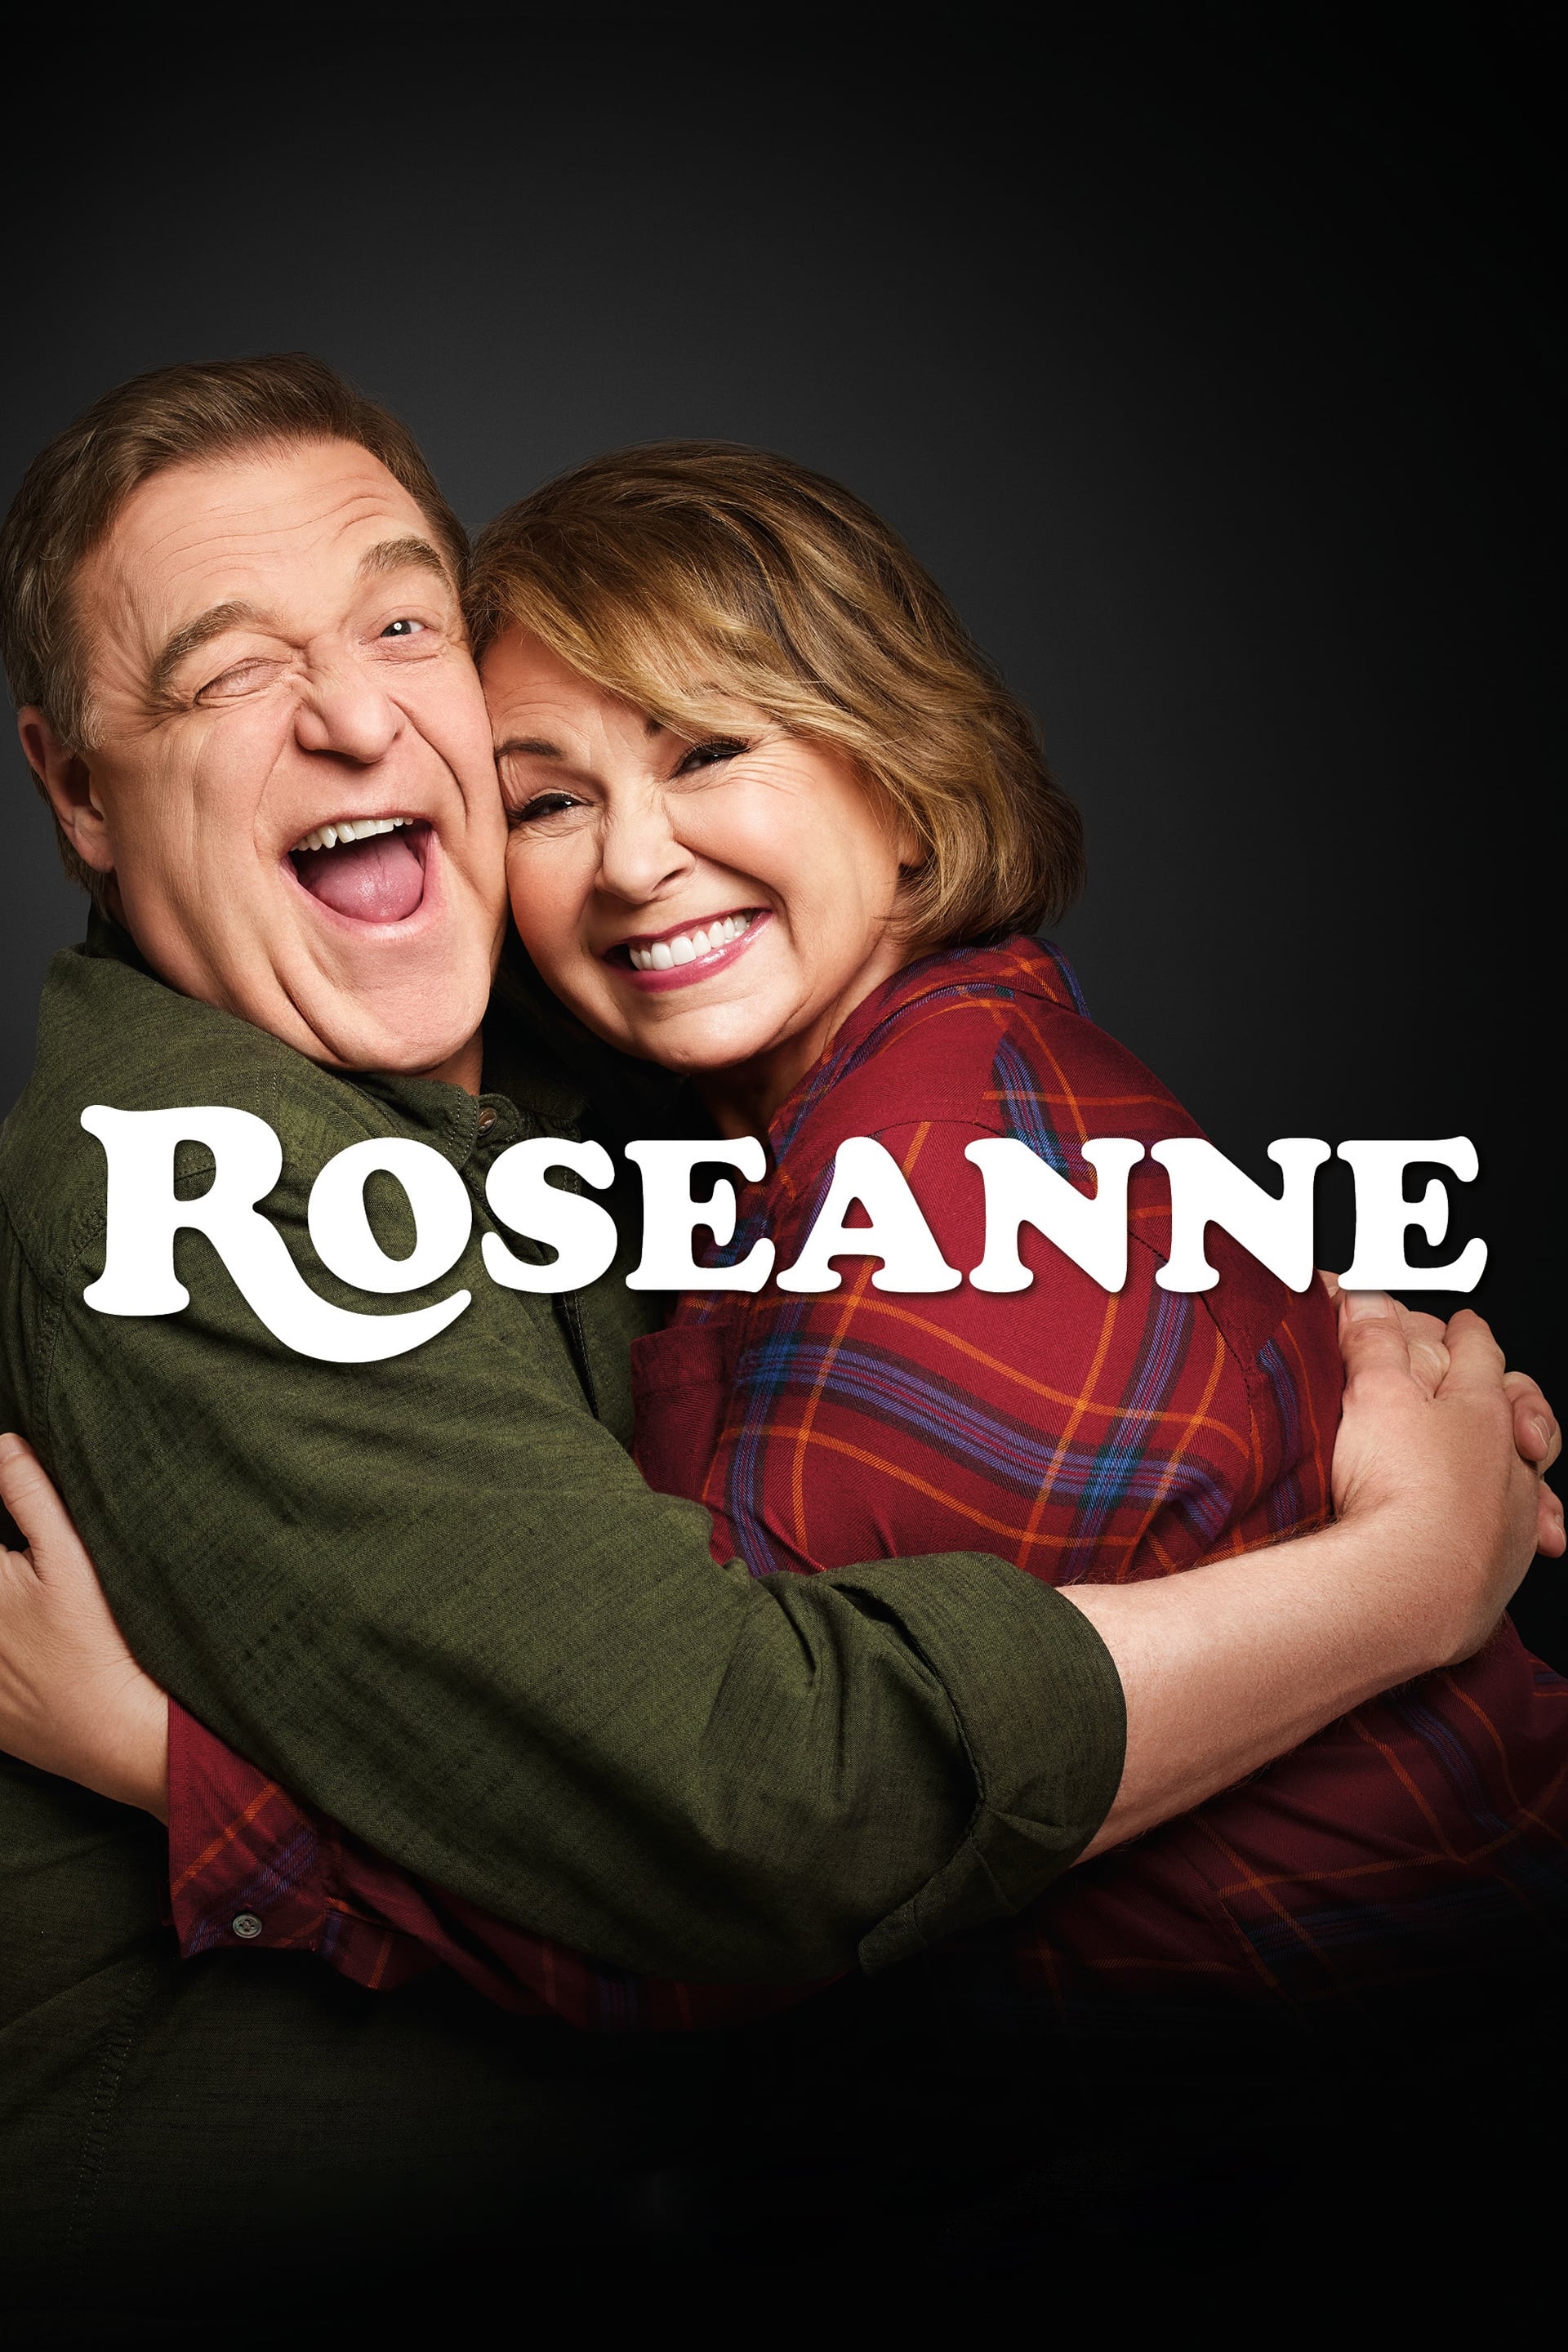 Roseanne TV Shows About Working Class